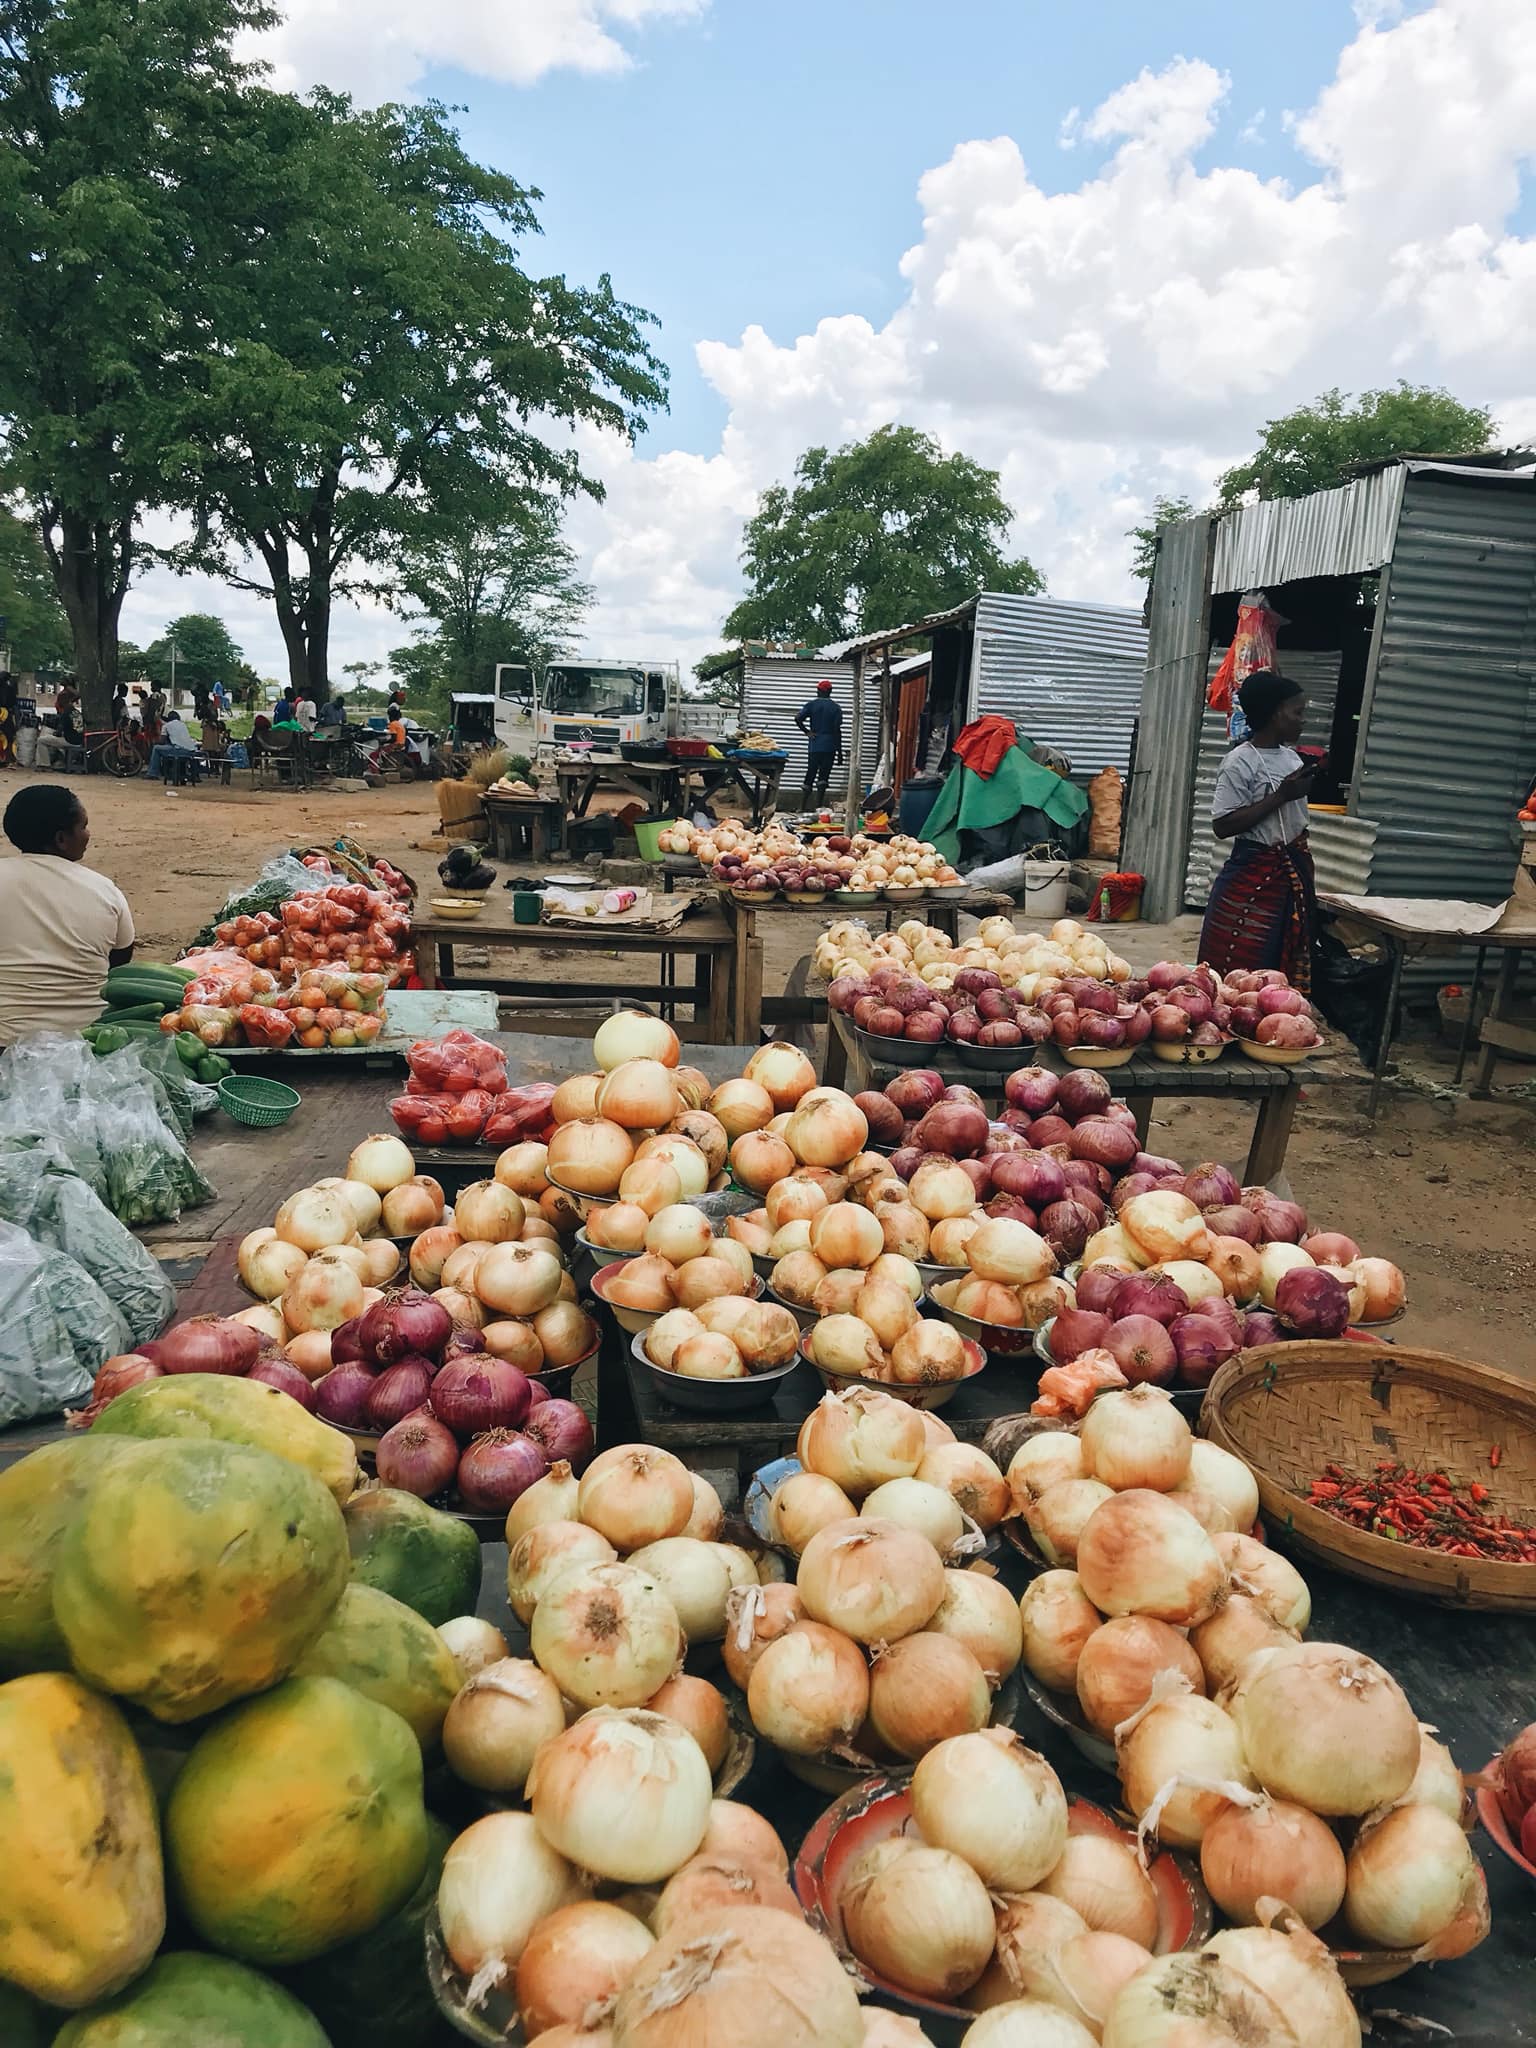 Nearby market with food